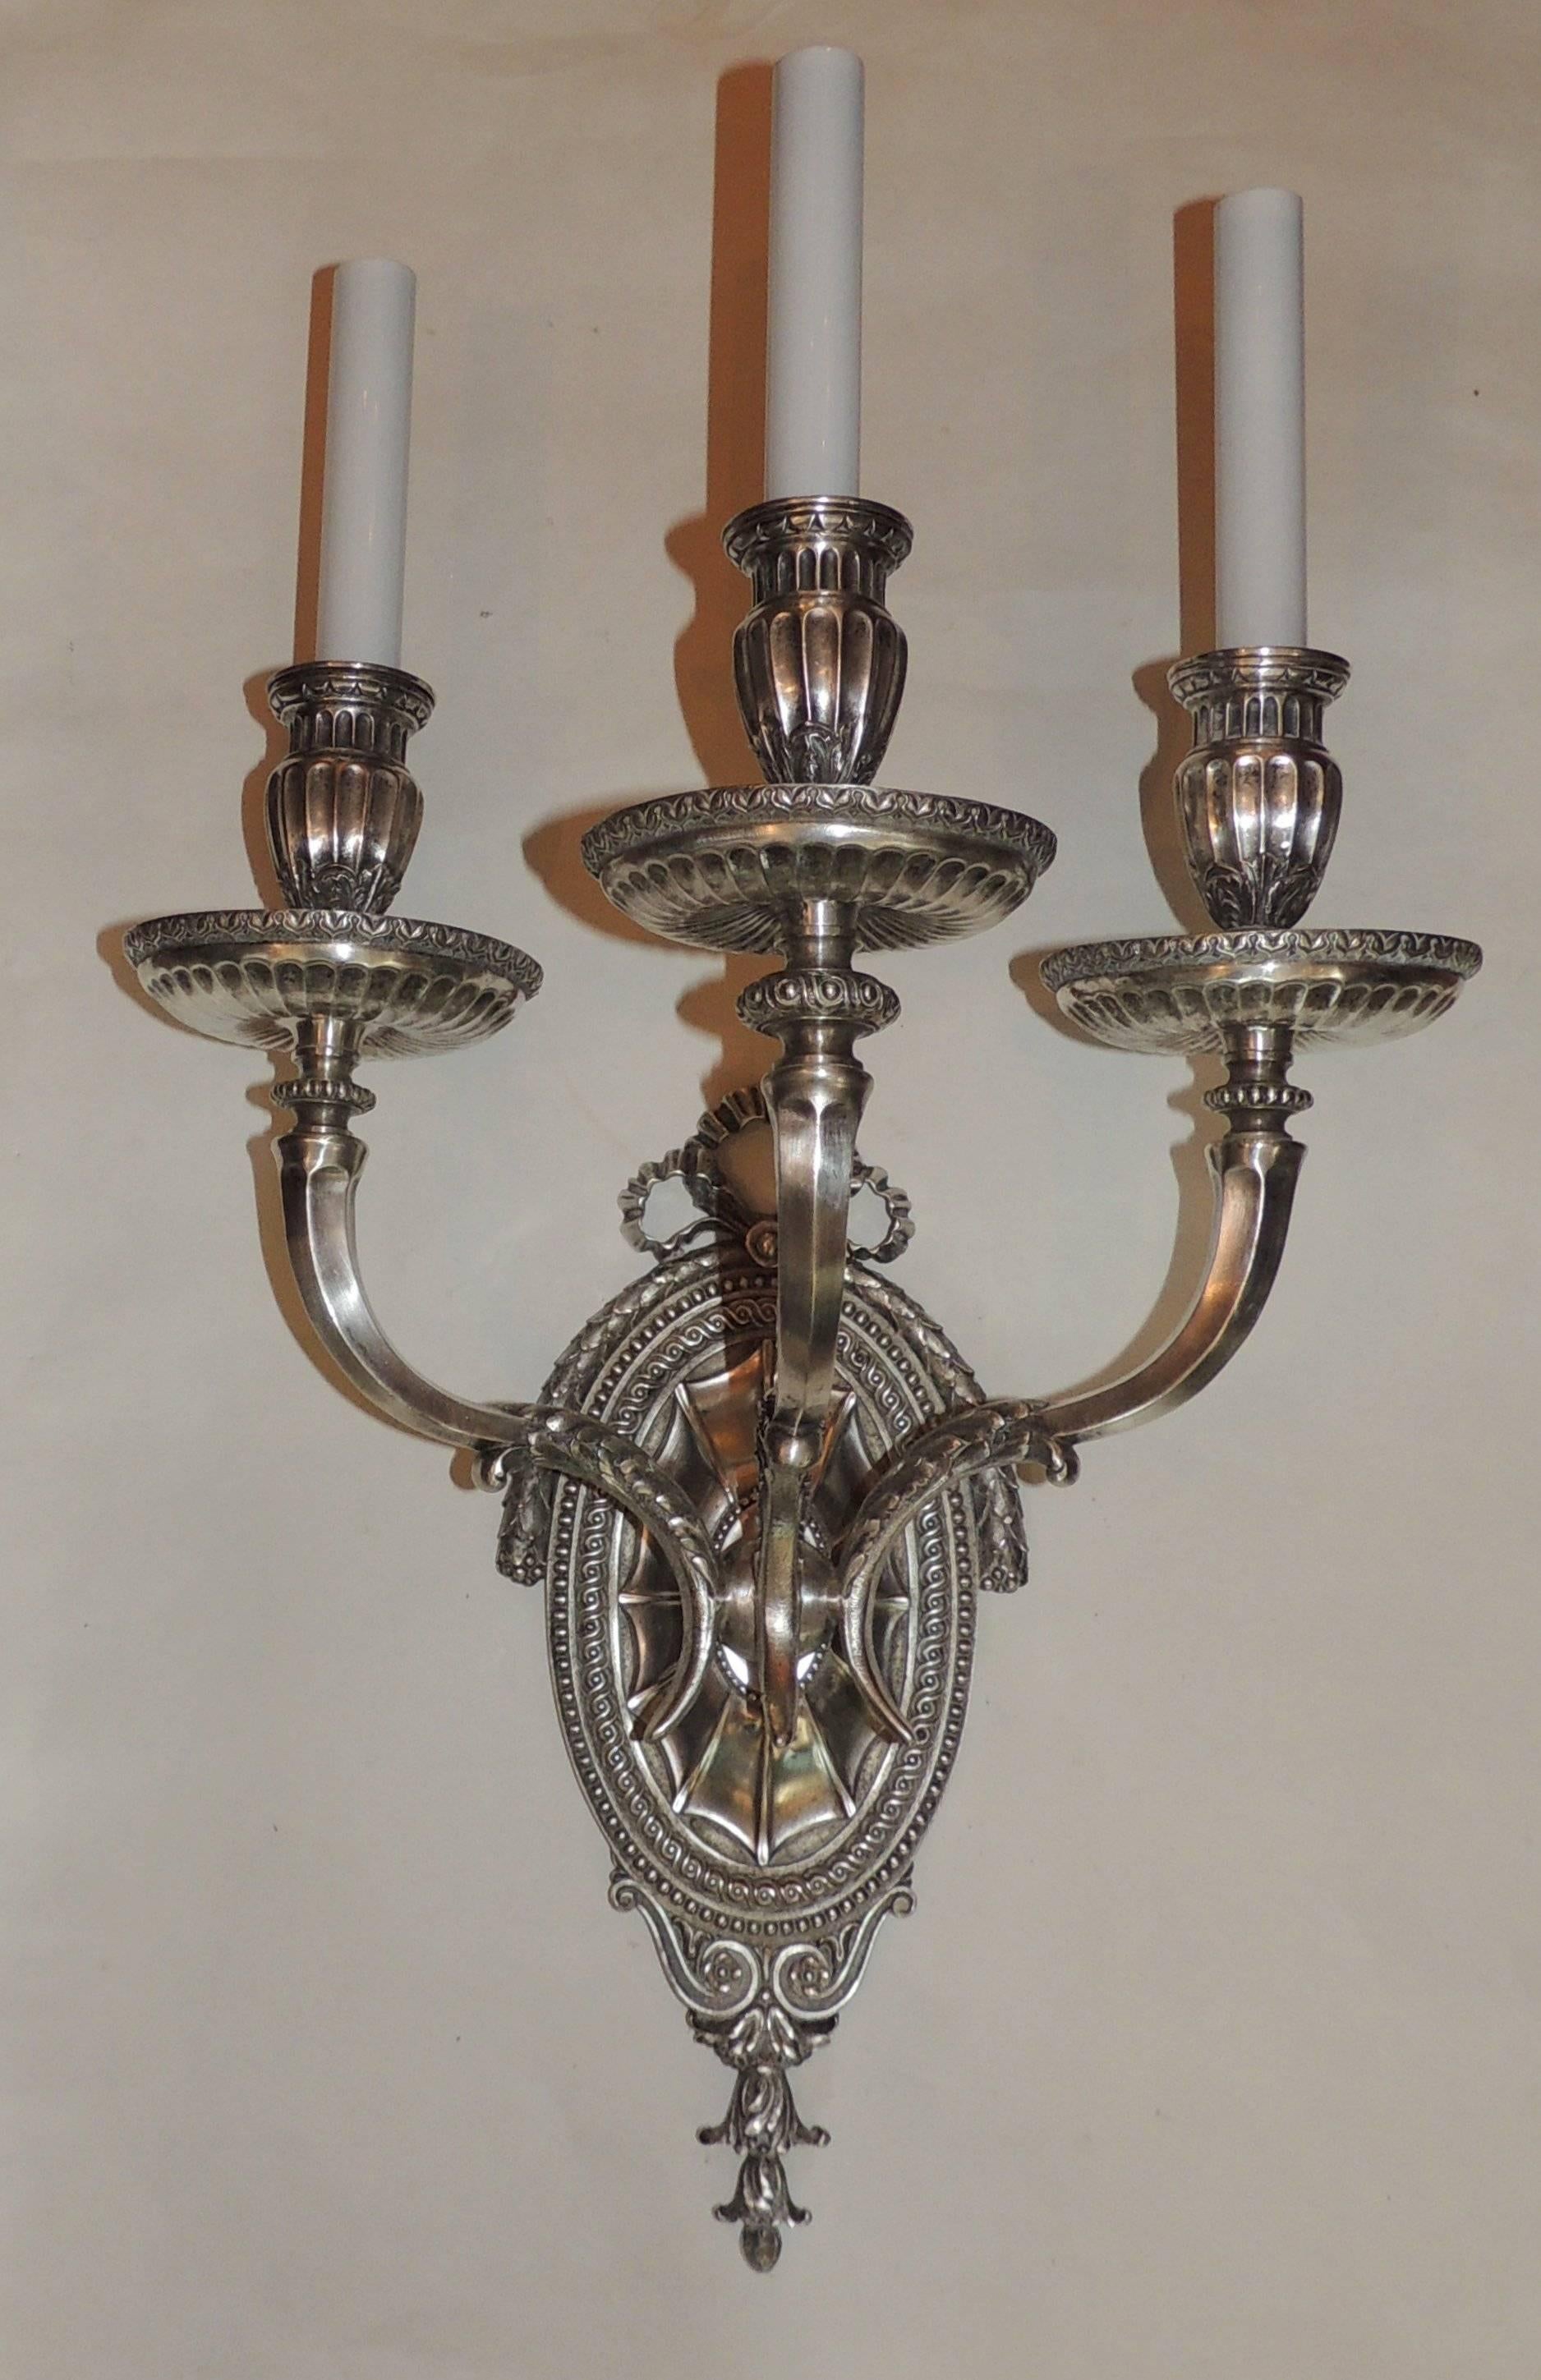 These wonderful silvered bronze three-arm sconces by Caldwell are beautifully detailed with a intricately detailed center medallion with draped filigree across the top and finished with a bow. The candle cups are finely fluted and decorated with